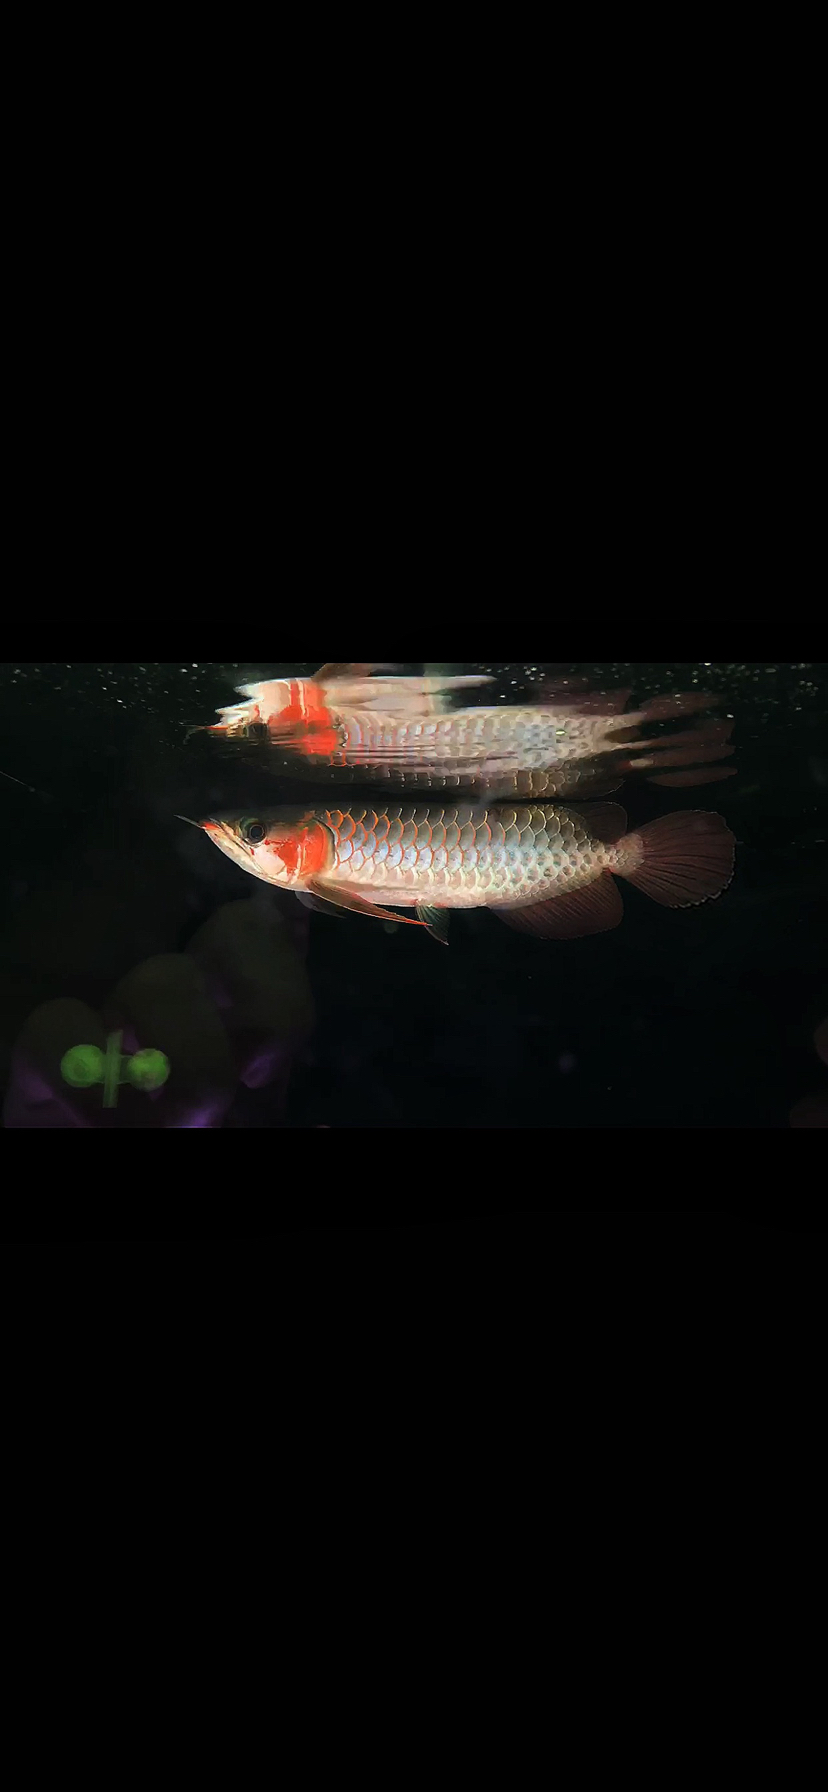 Content can cause extremely comfortable watch accompanied by parents Flowerhorn Fish ASIAN AROWANA,AROWANA,STINGRAY The1sheet